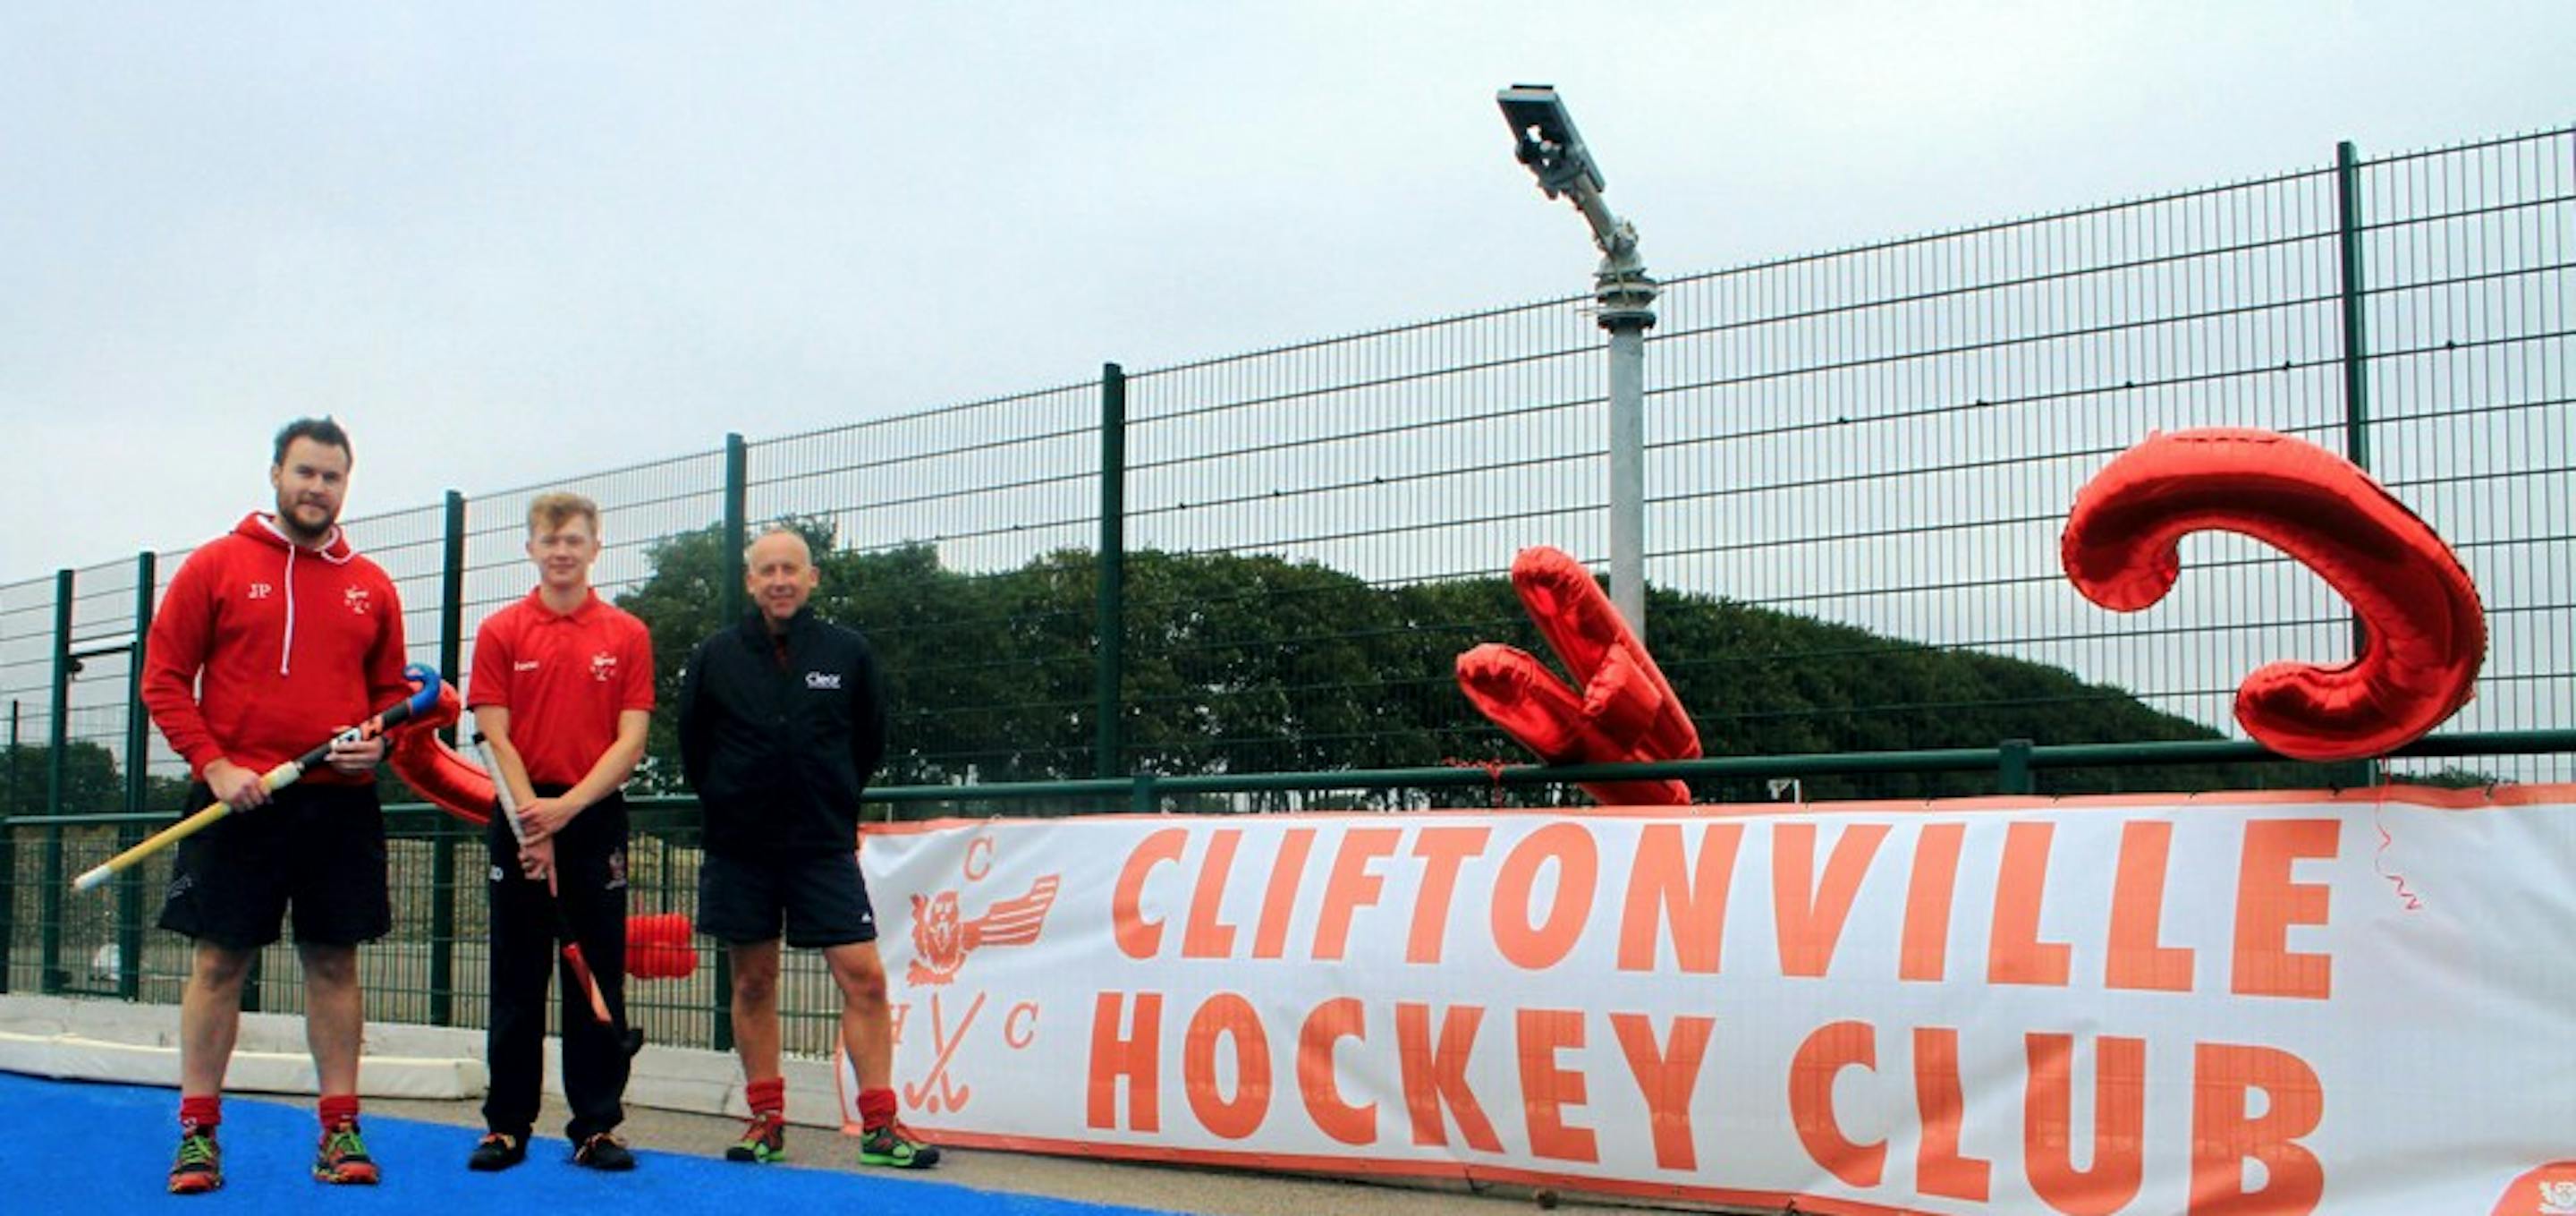 James Provins, Isaac Dilkes of Cliftonville HC and Clear Safety director Matt Westby